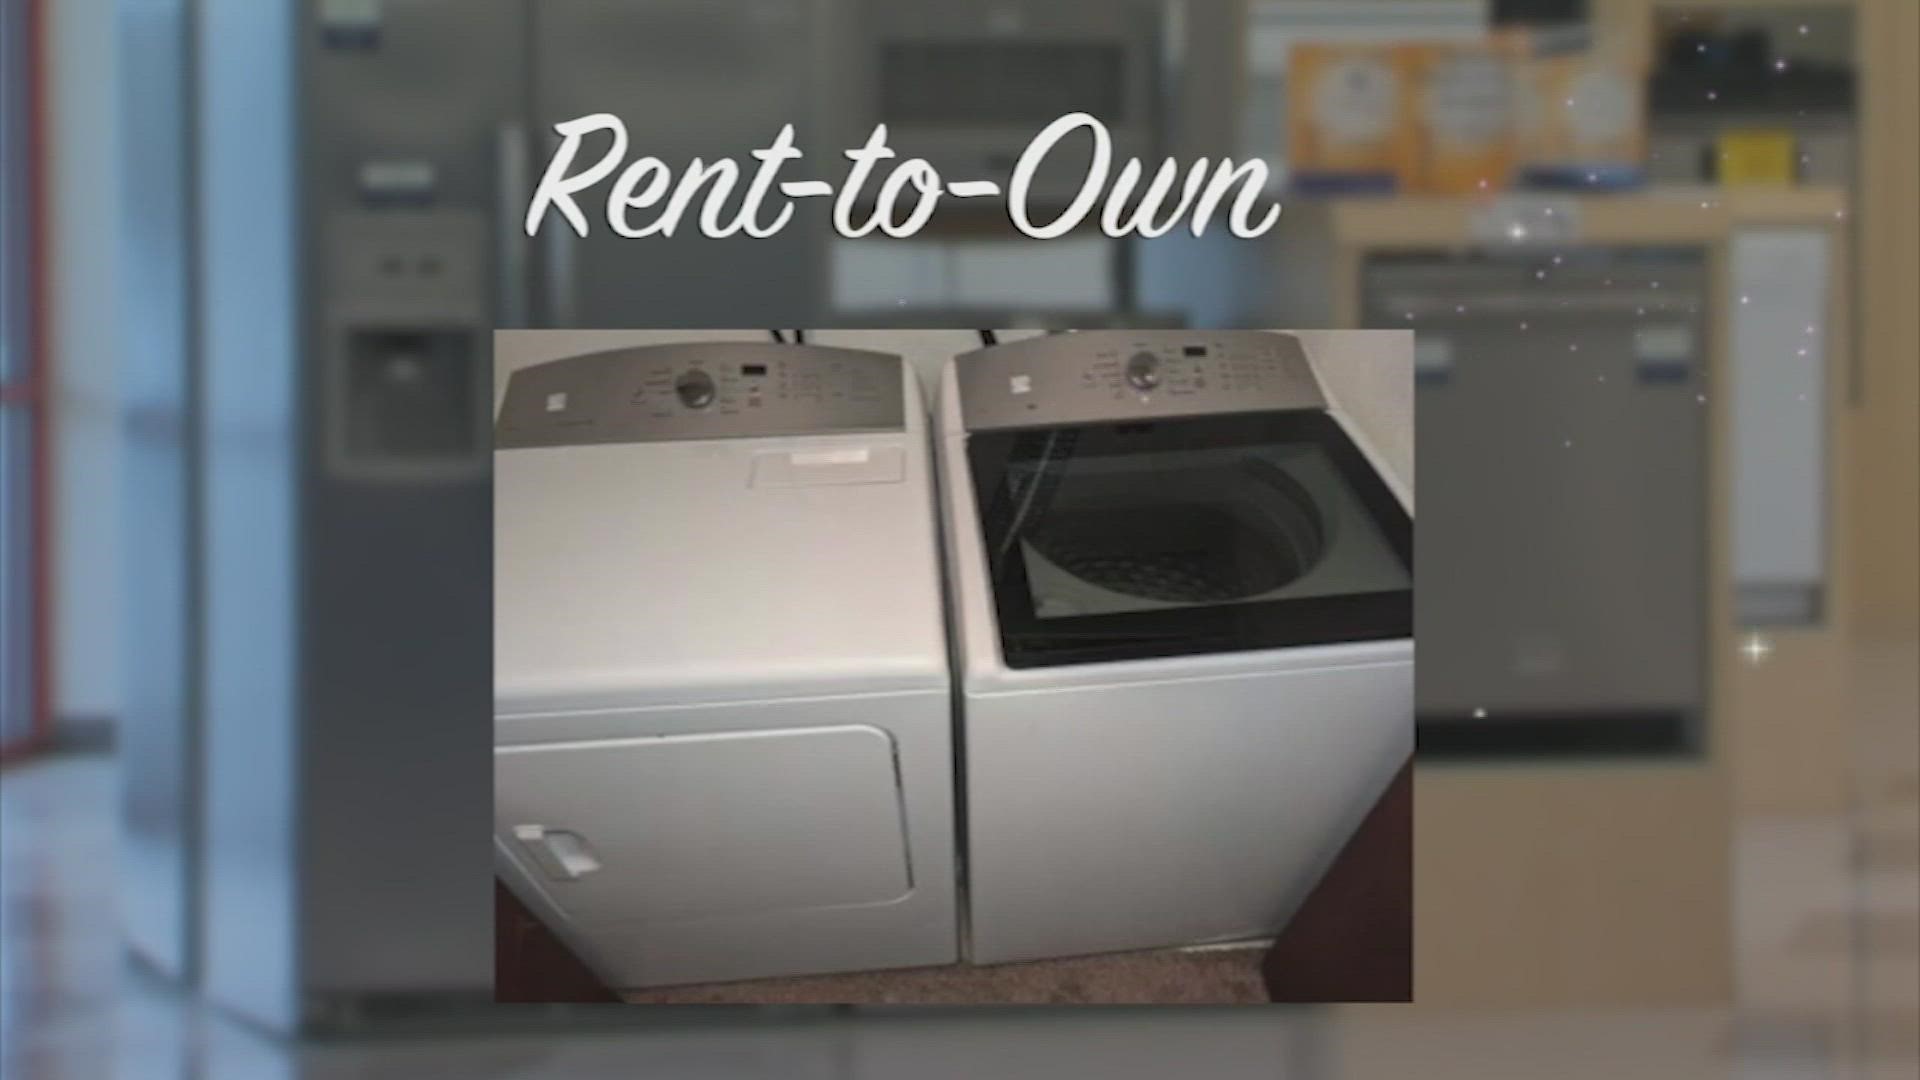 If you suddenly need a new appliance, a rent-to-own store may seem like an affordable solution. But beware of how expensive this can really be.